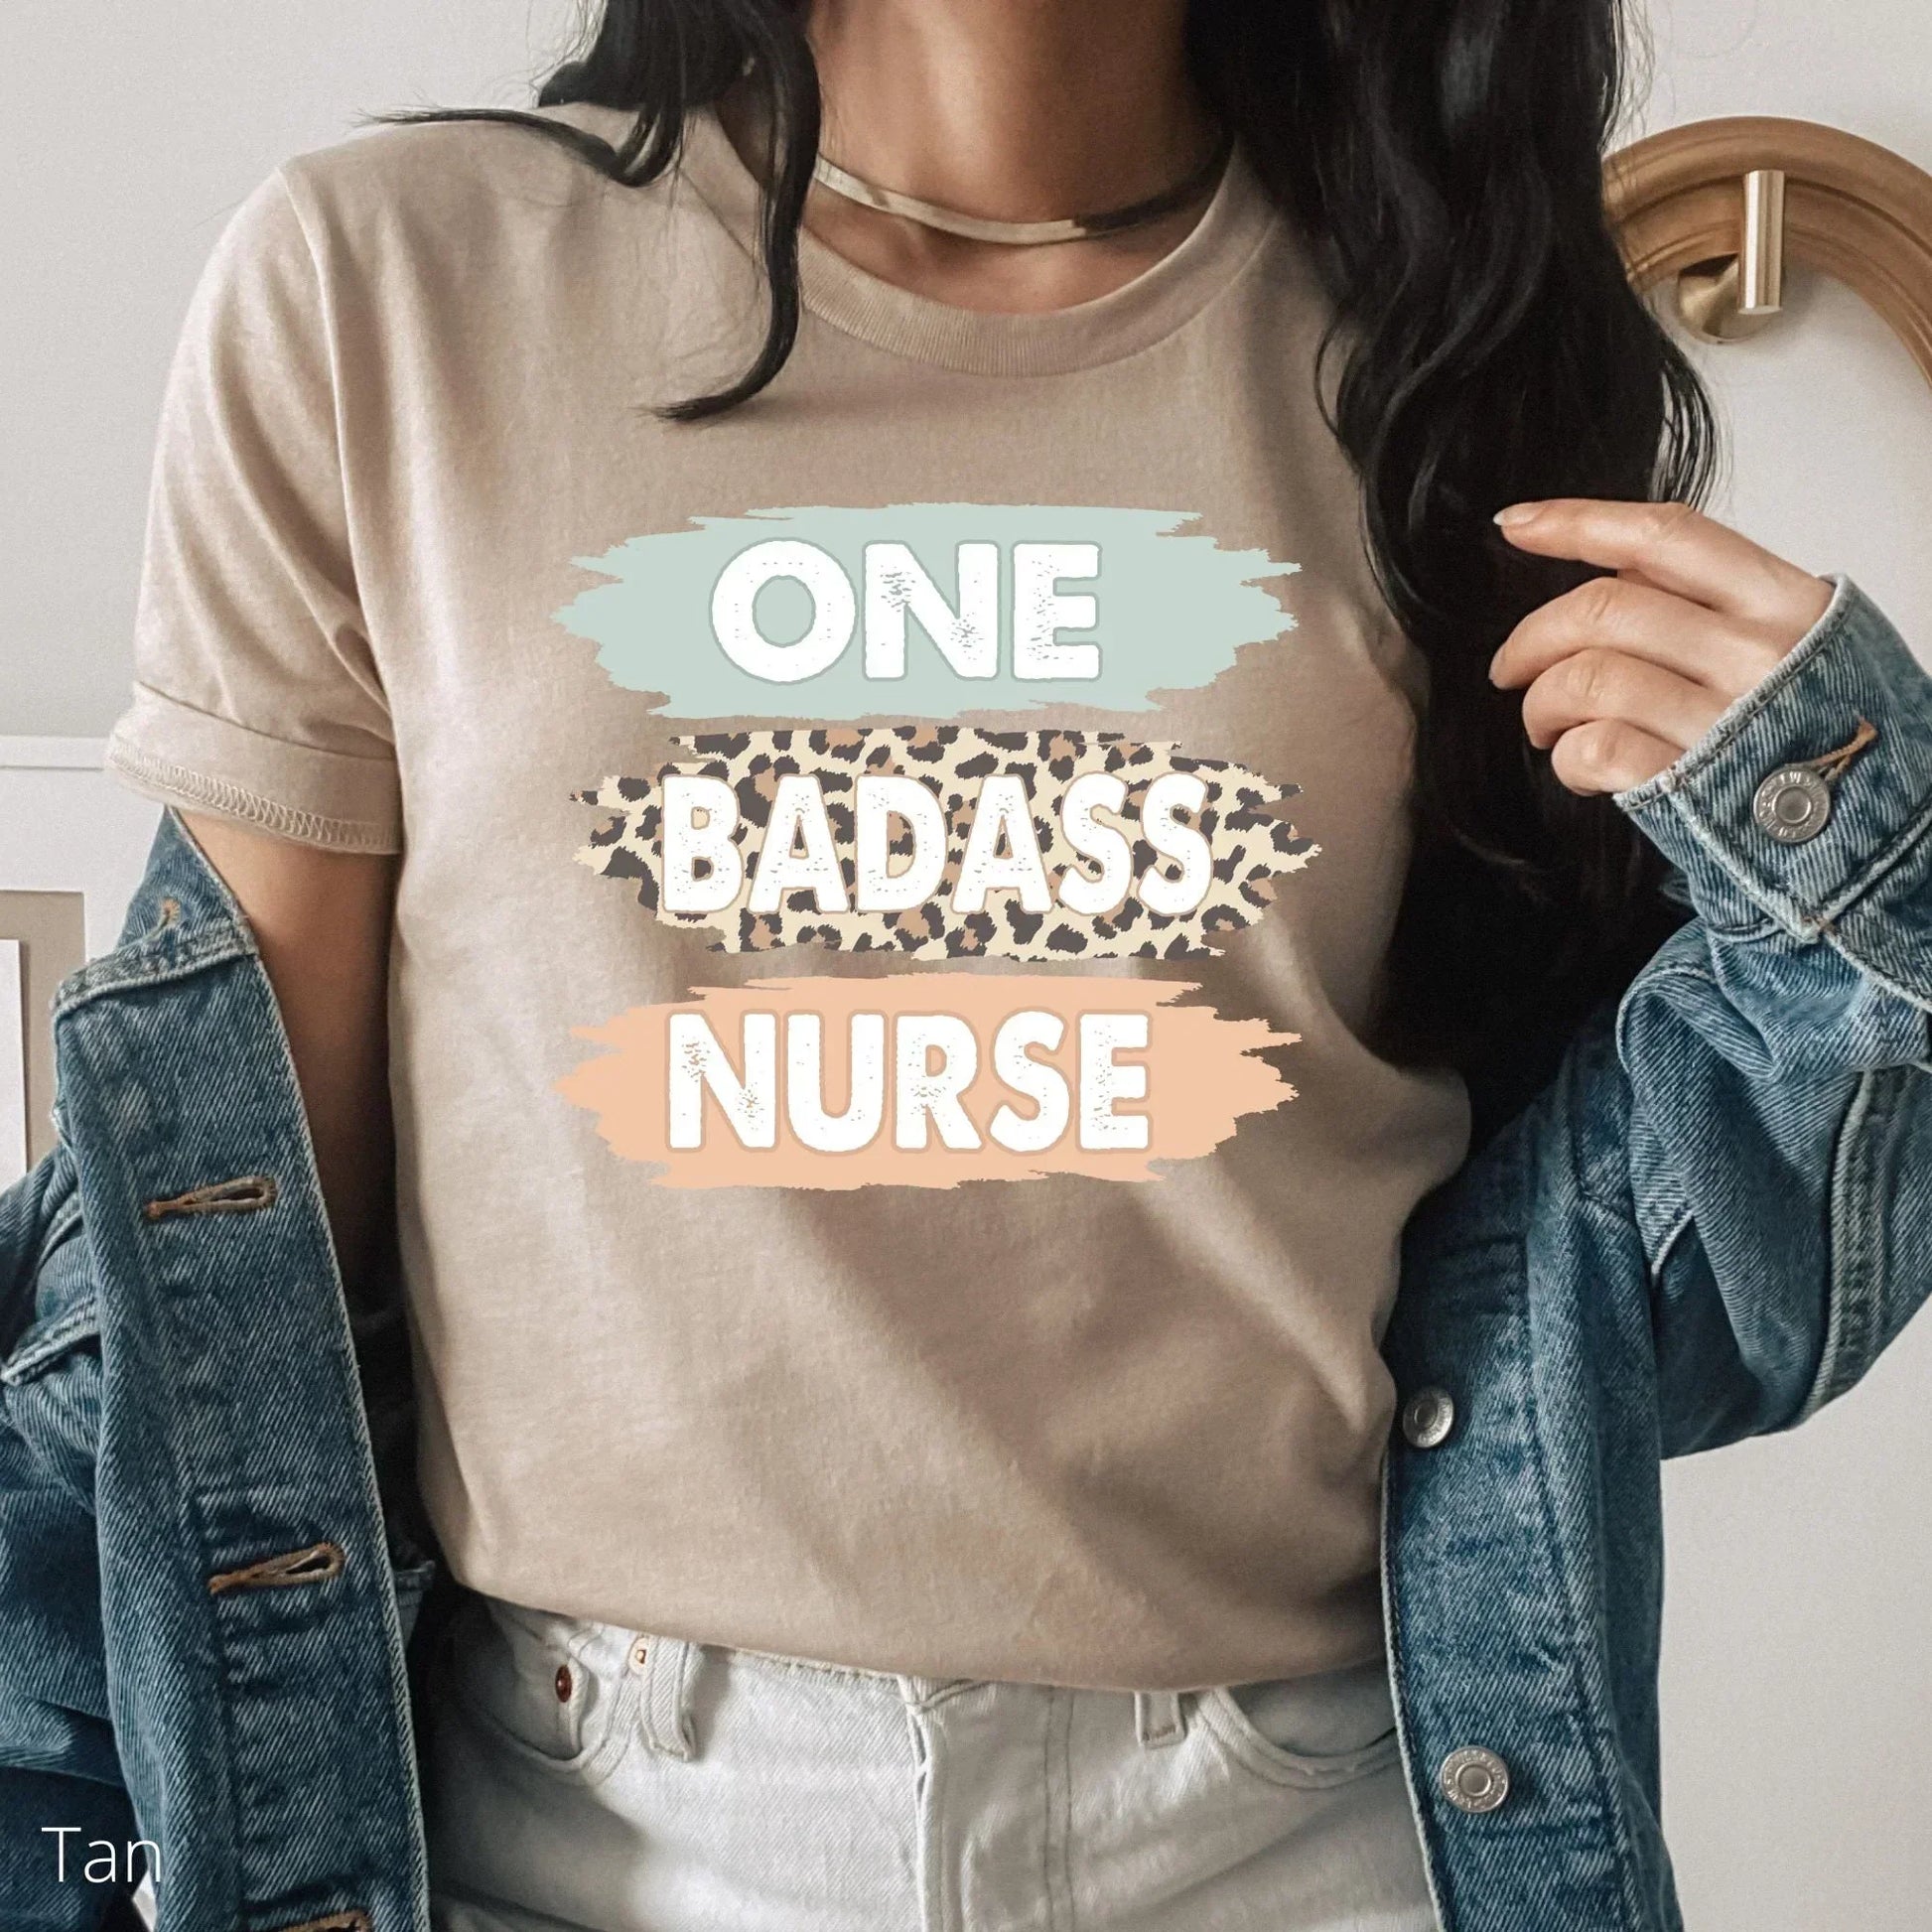 Retro Nurse Shirt | Great for Students, Practitioners, New Grads, RN, ICU Oncology, Pediatric, ER, L&D, Retired Nurse Week Appreciation Gift